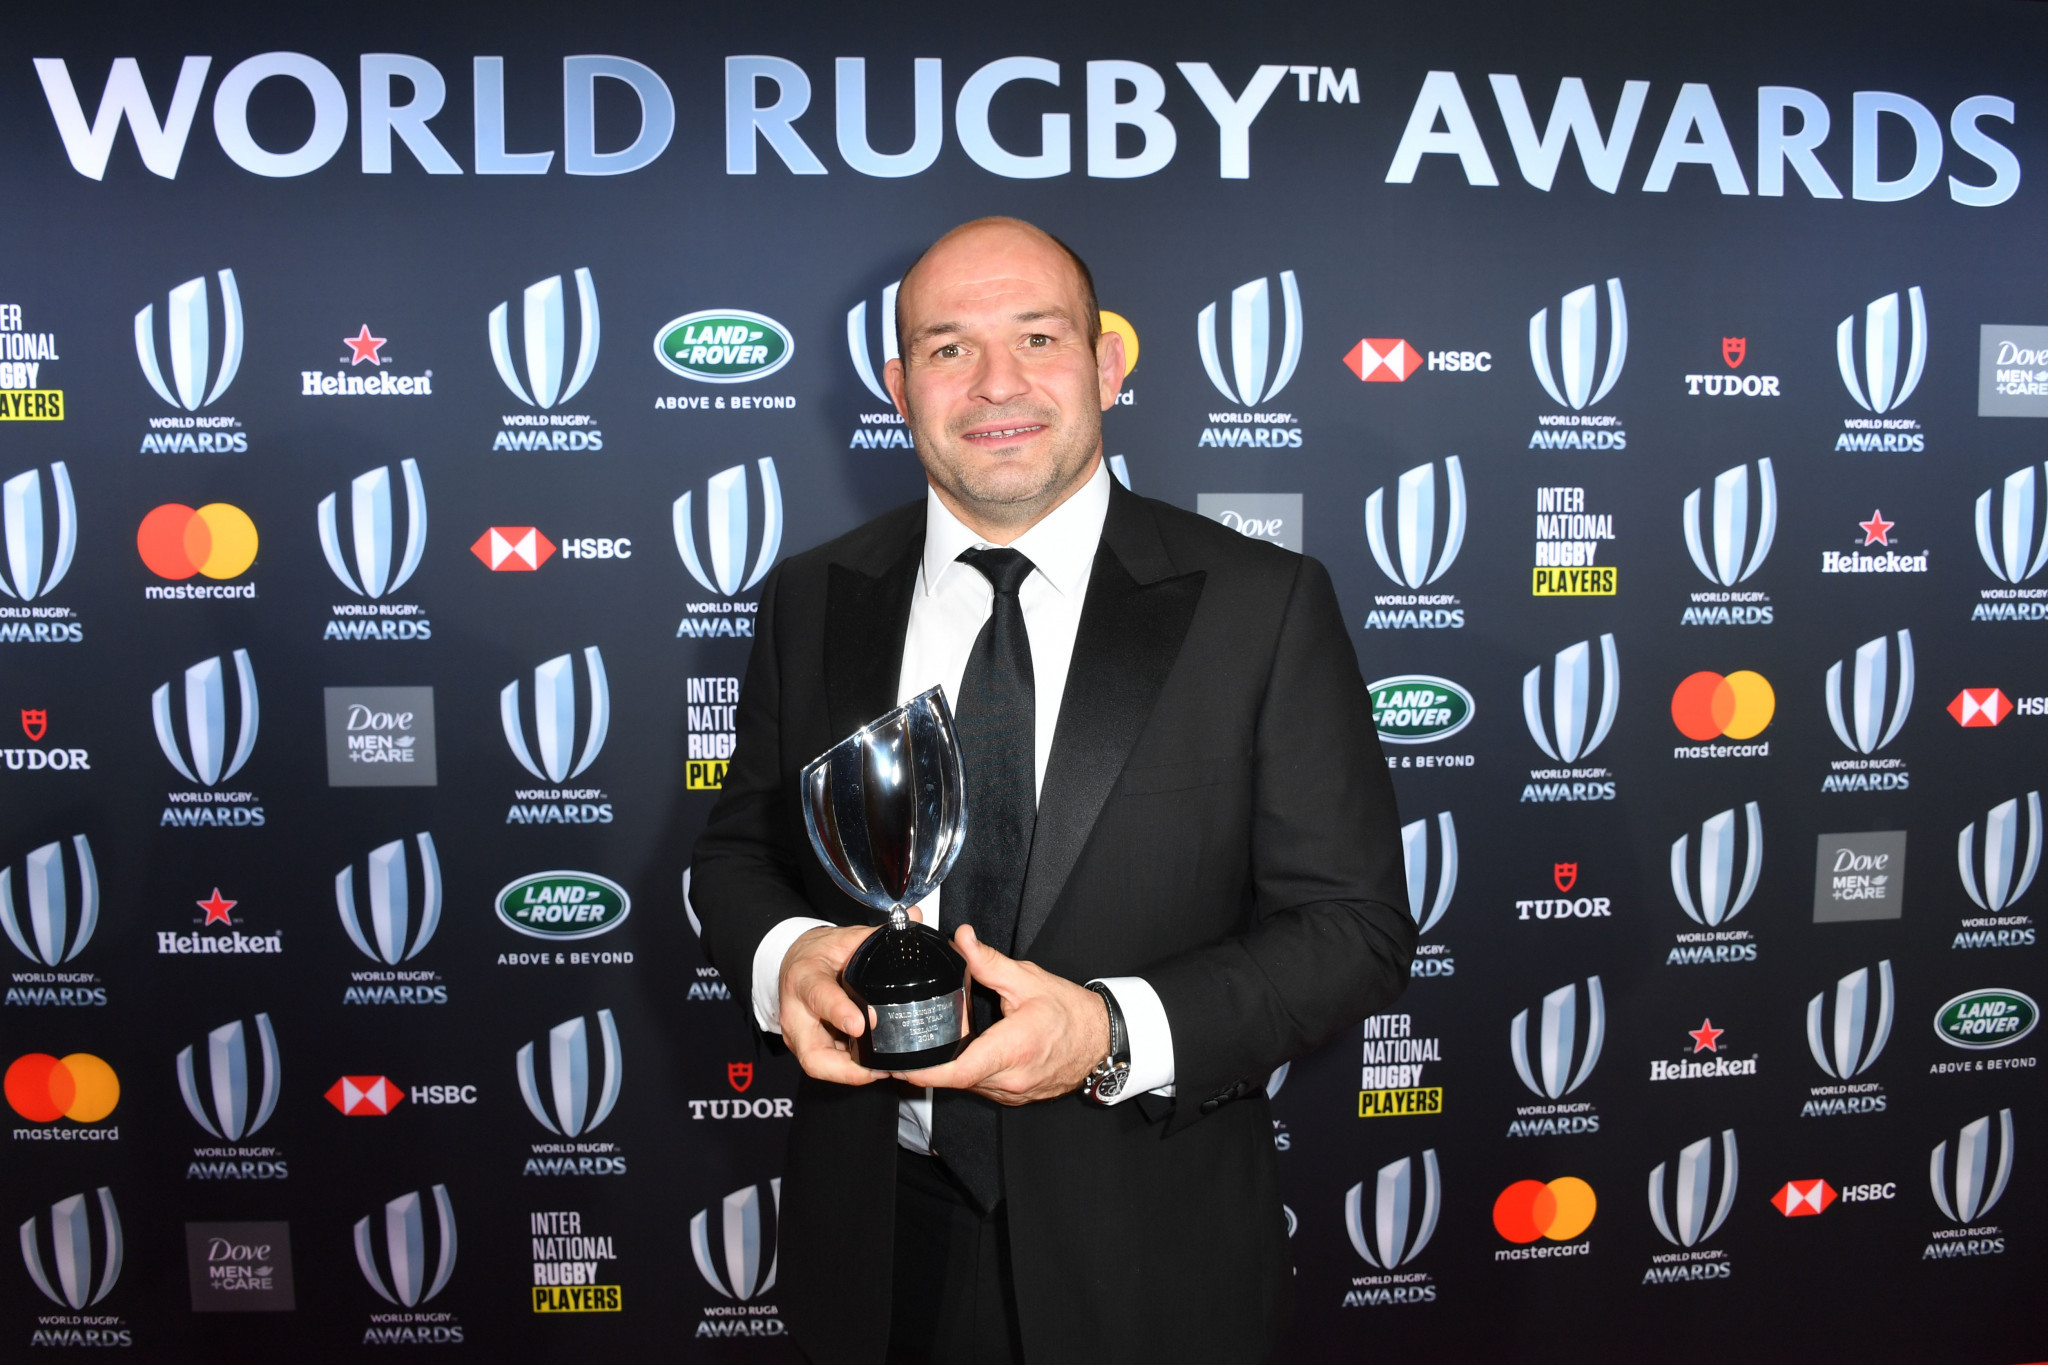 Irish captain Rory Best accepted the Team of the Year Award after they achieved their most successful ever year ©Getty Images